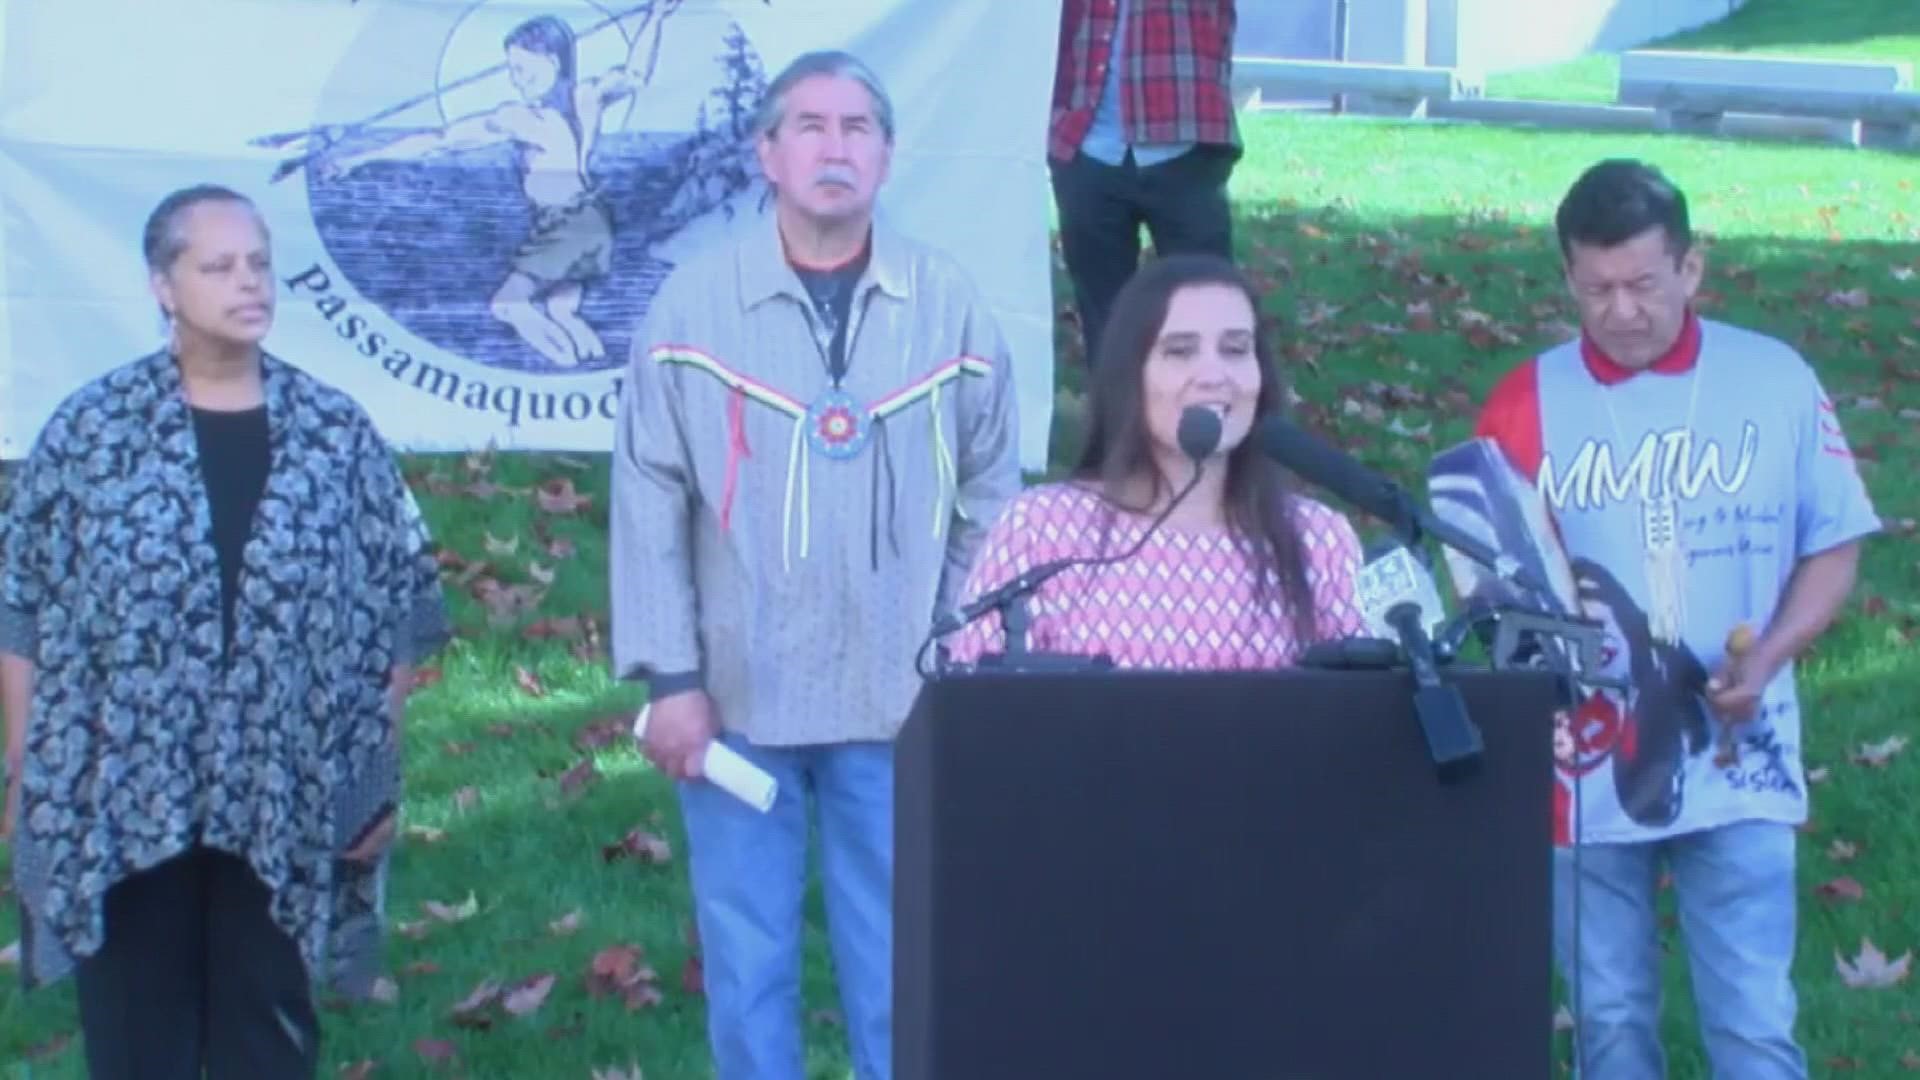 "The only true way to celebrate Indigenous Peoples Day in Maine is to change the system, that treats us differently than any other tribe in the country."